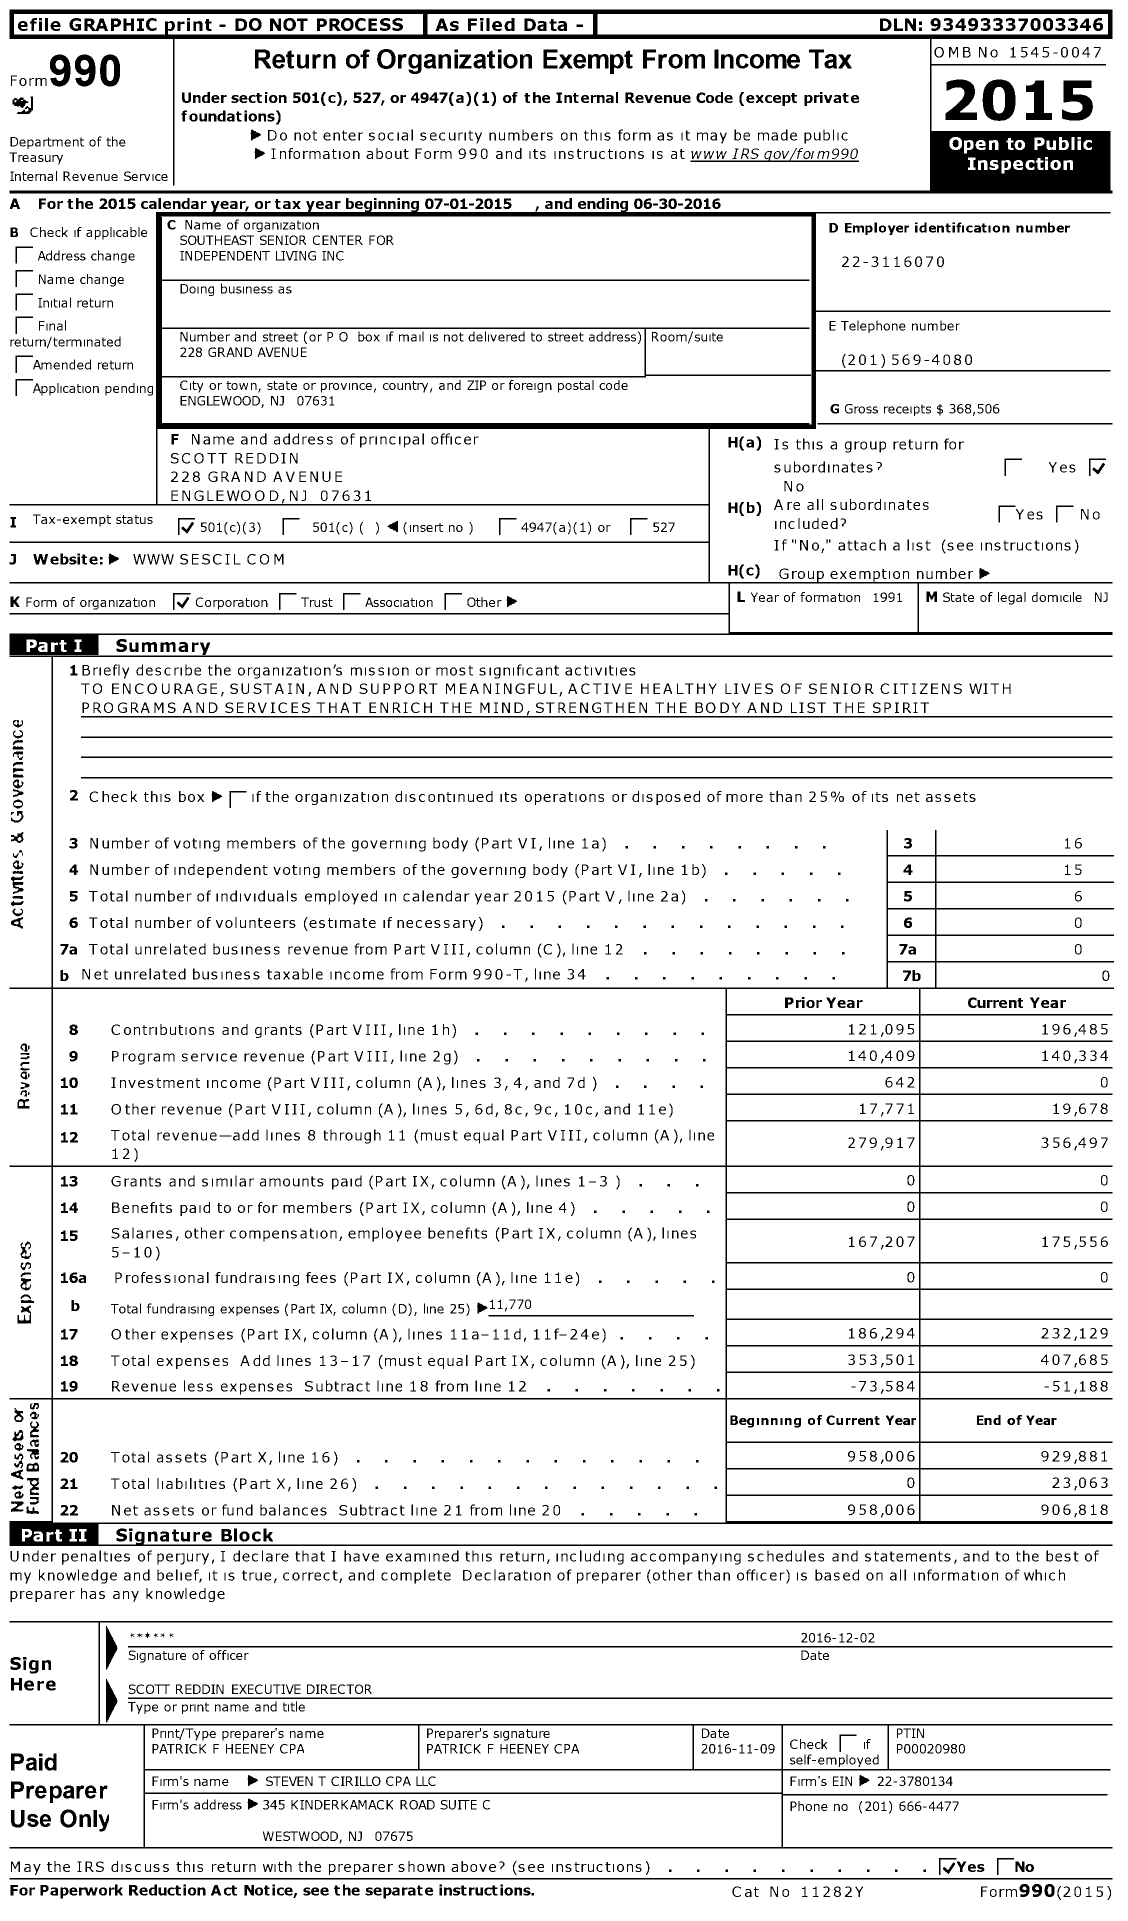 Image of first page of 2015 Form 990 for Southeast Senior Center for Independent Living